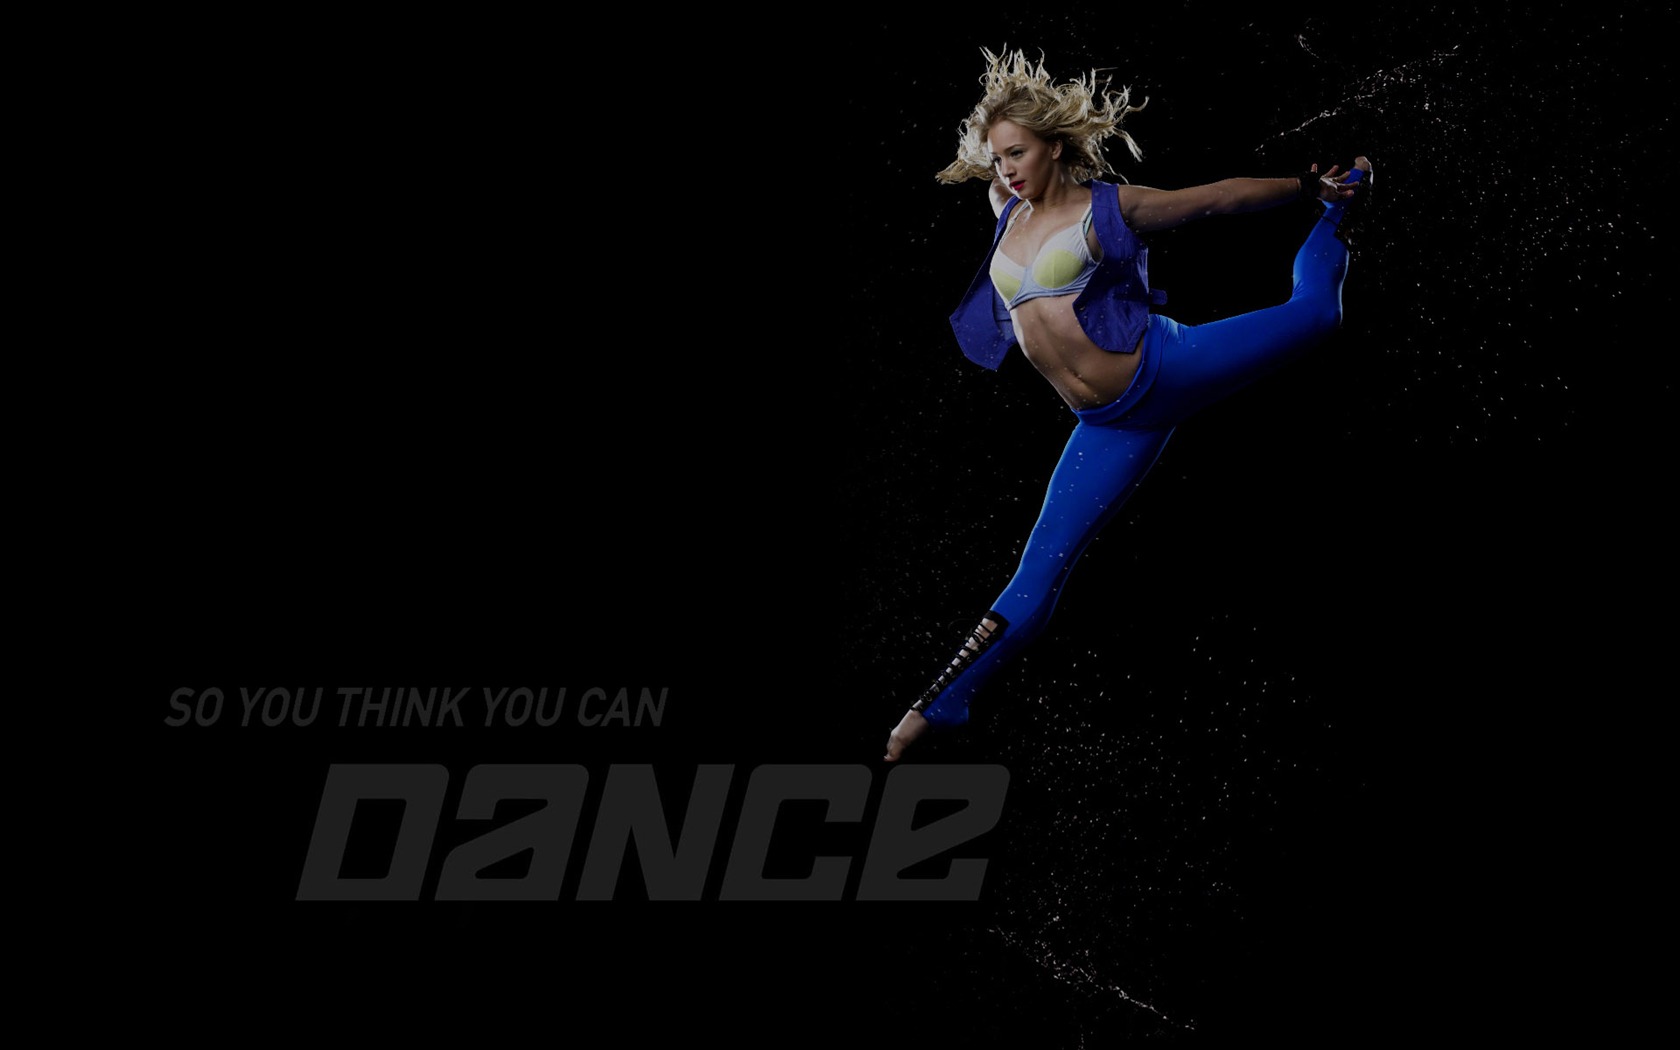 So You Think You Can Dance wallpaper (2) #19 - 1680x1050